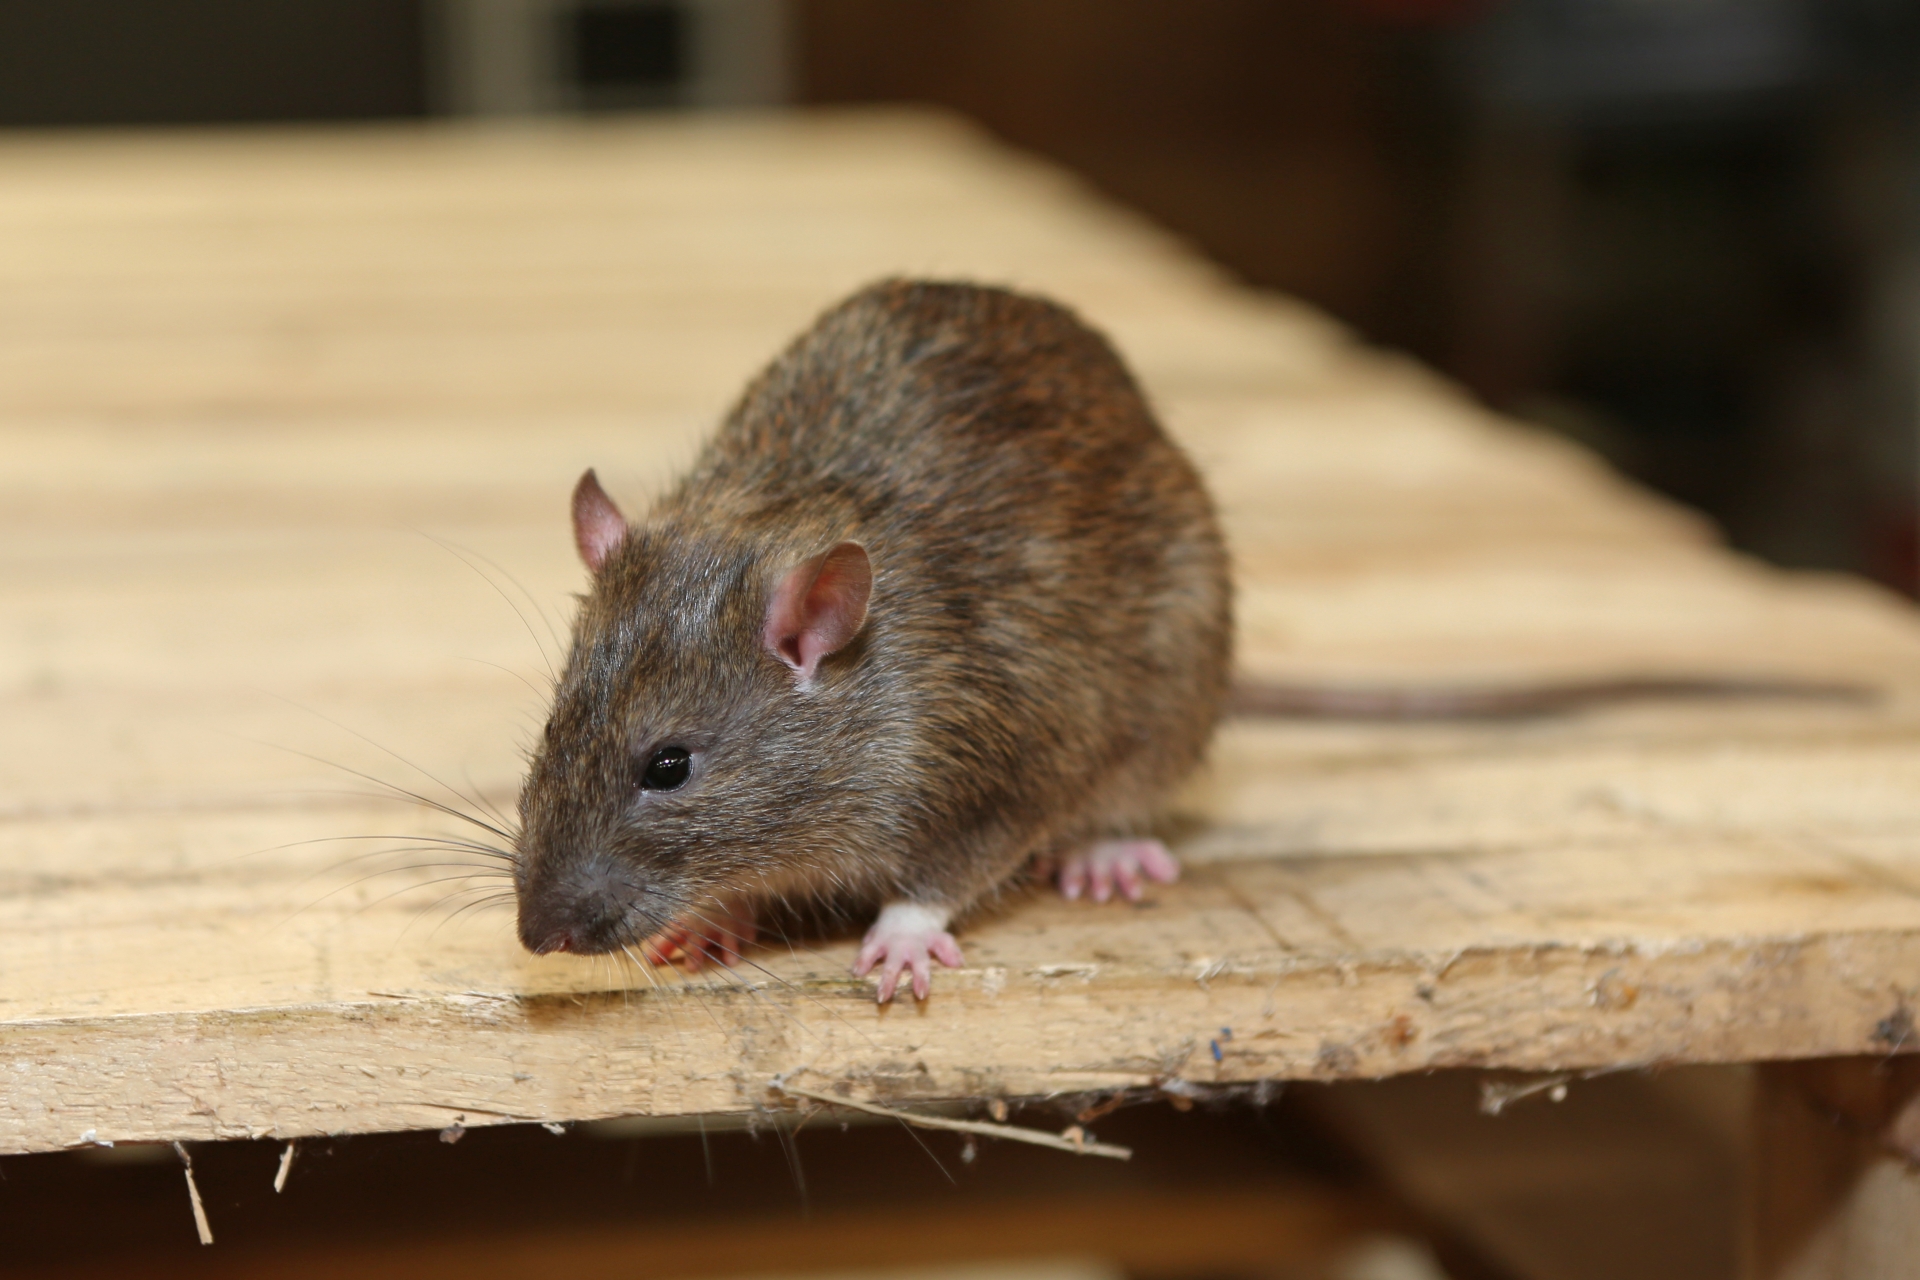 Rat Control, Pest Control in Coulsdon, Old Coulsdon, Chipstead, CR5. Call Now 020 8166 9746